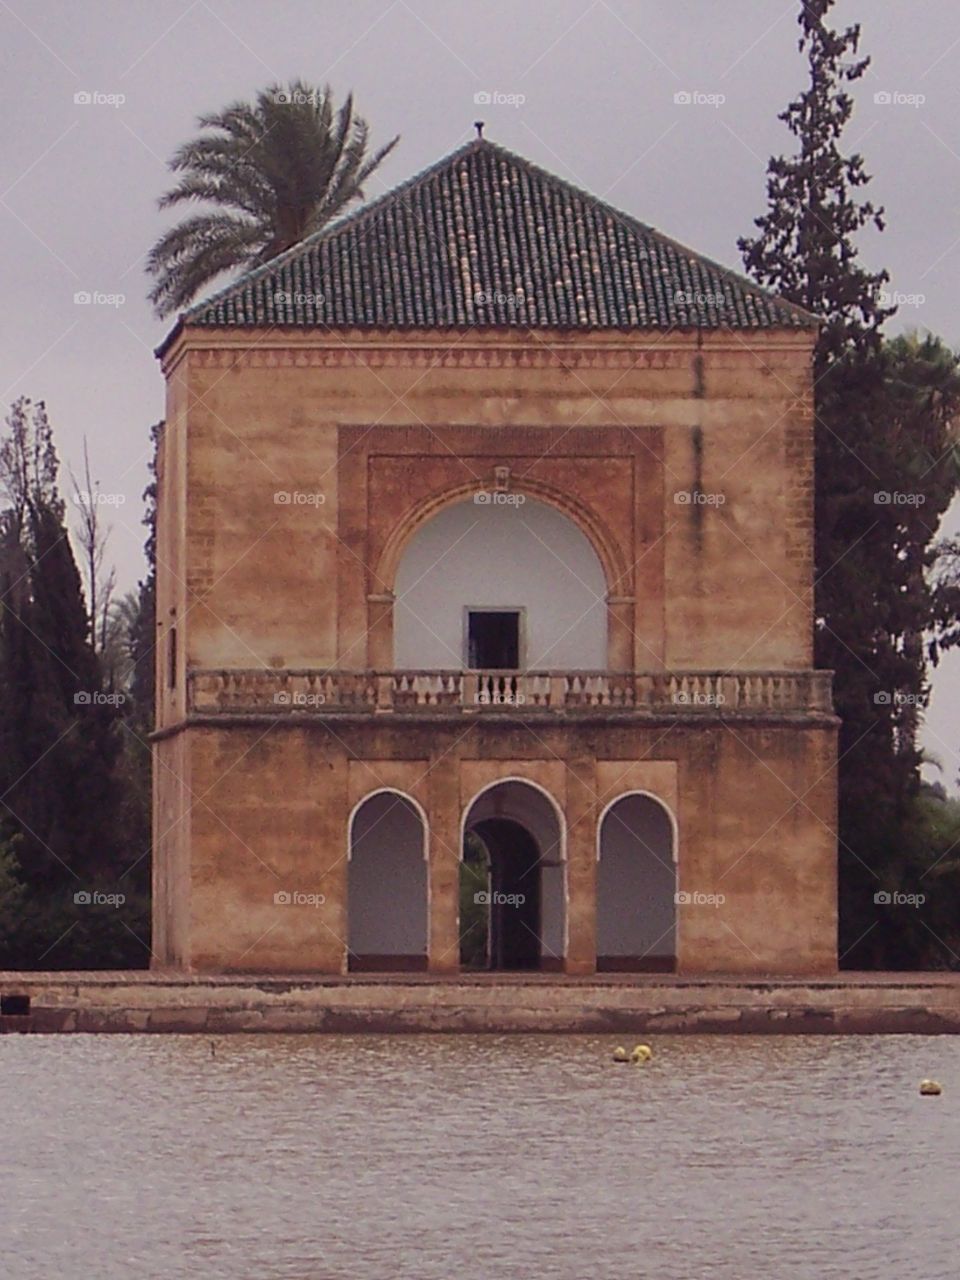 Monument in morocco 